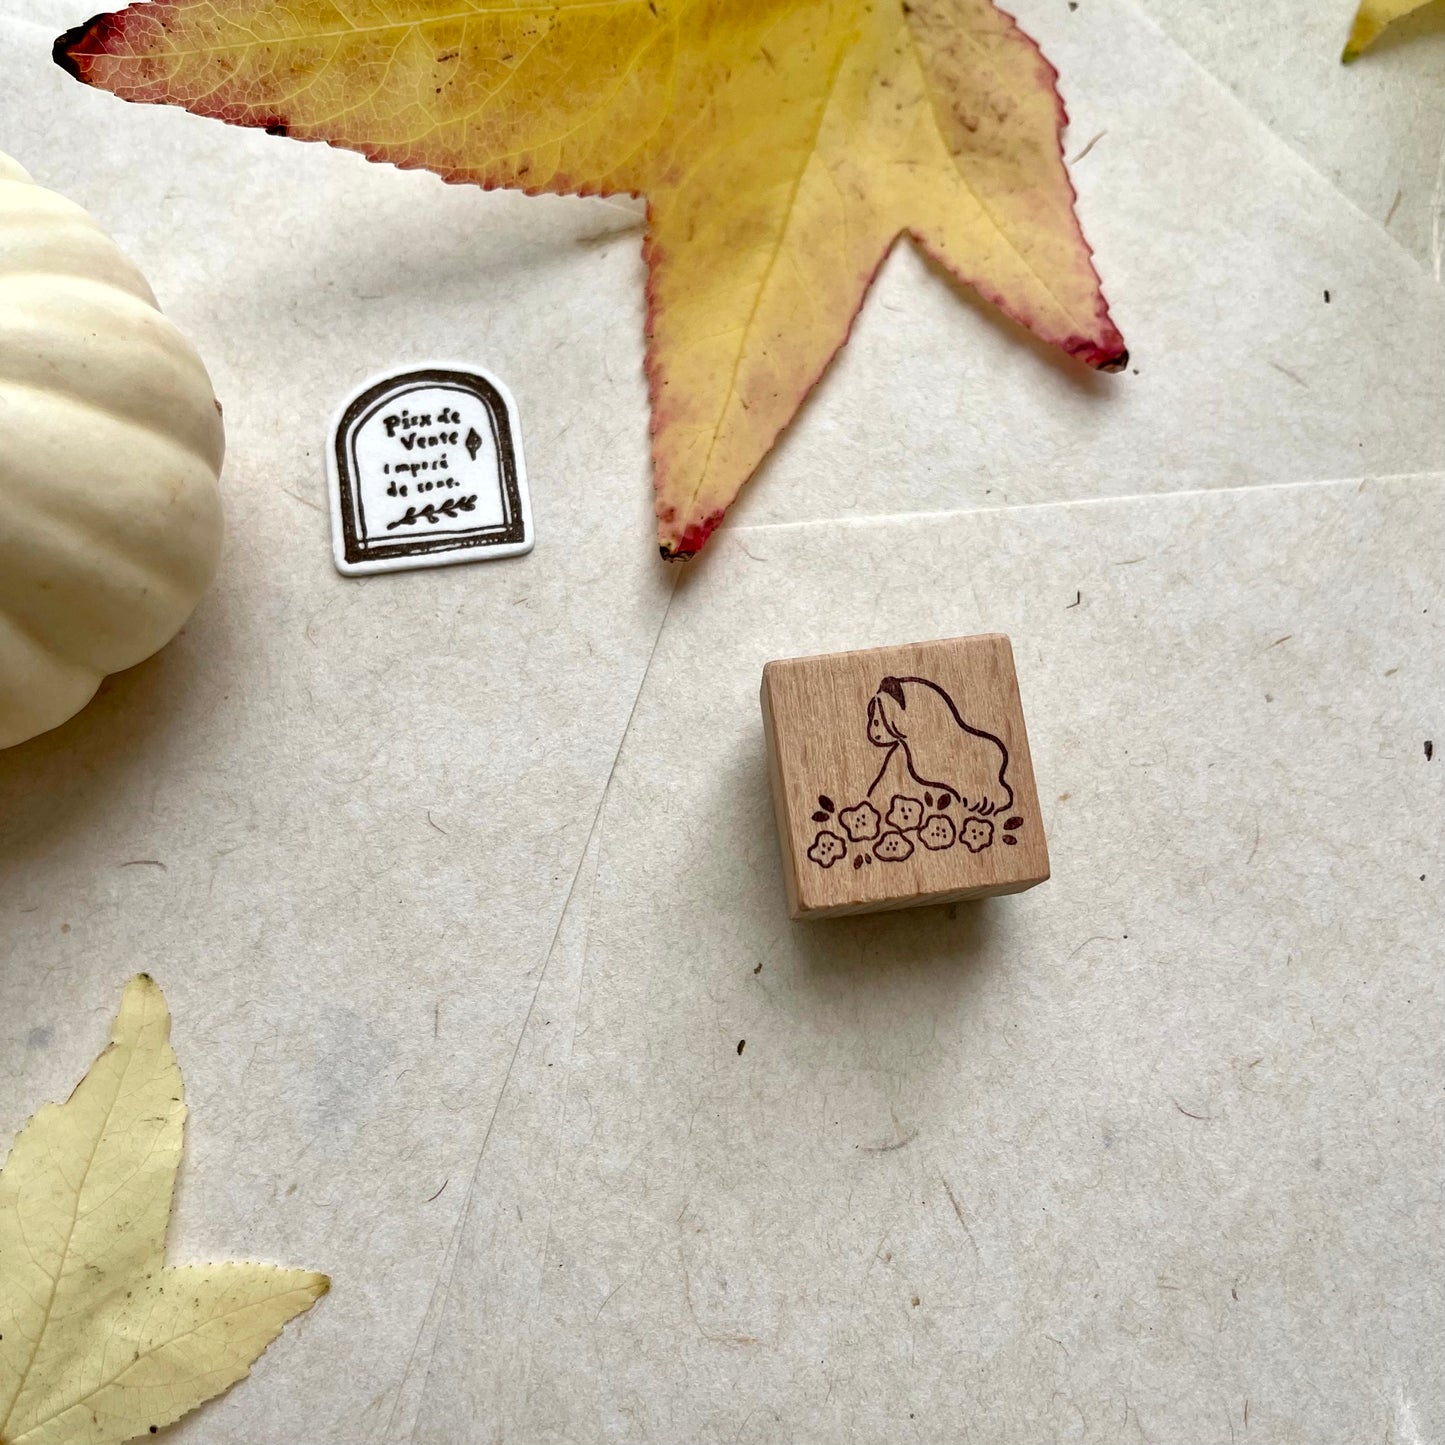 Msbulat A Blooming Life Rubber Stamps // 5 Designs